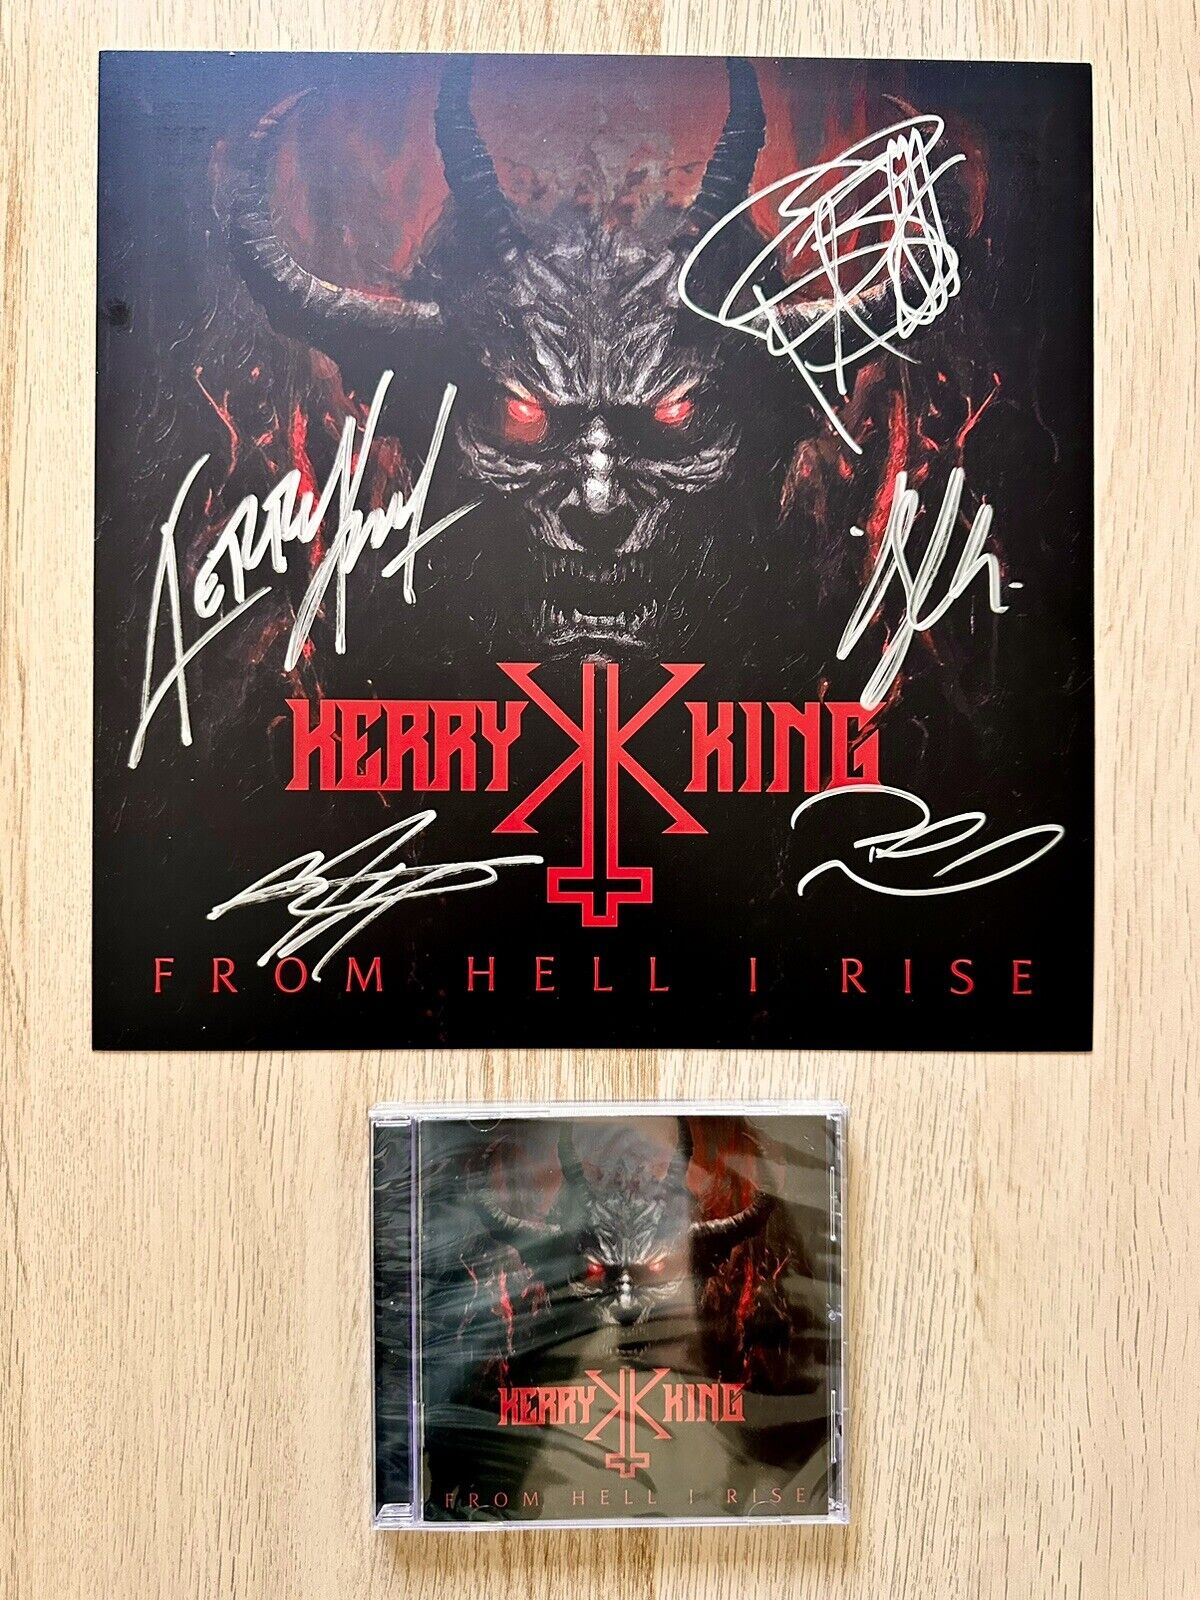 Kerry King From Hell I Rise SIGNED Lithograph + CD Brand NEW AUTOGRAPHED Slayer